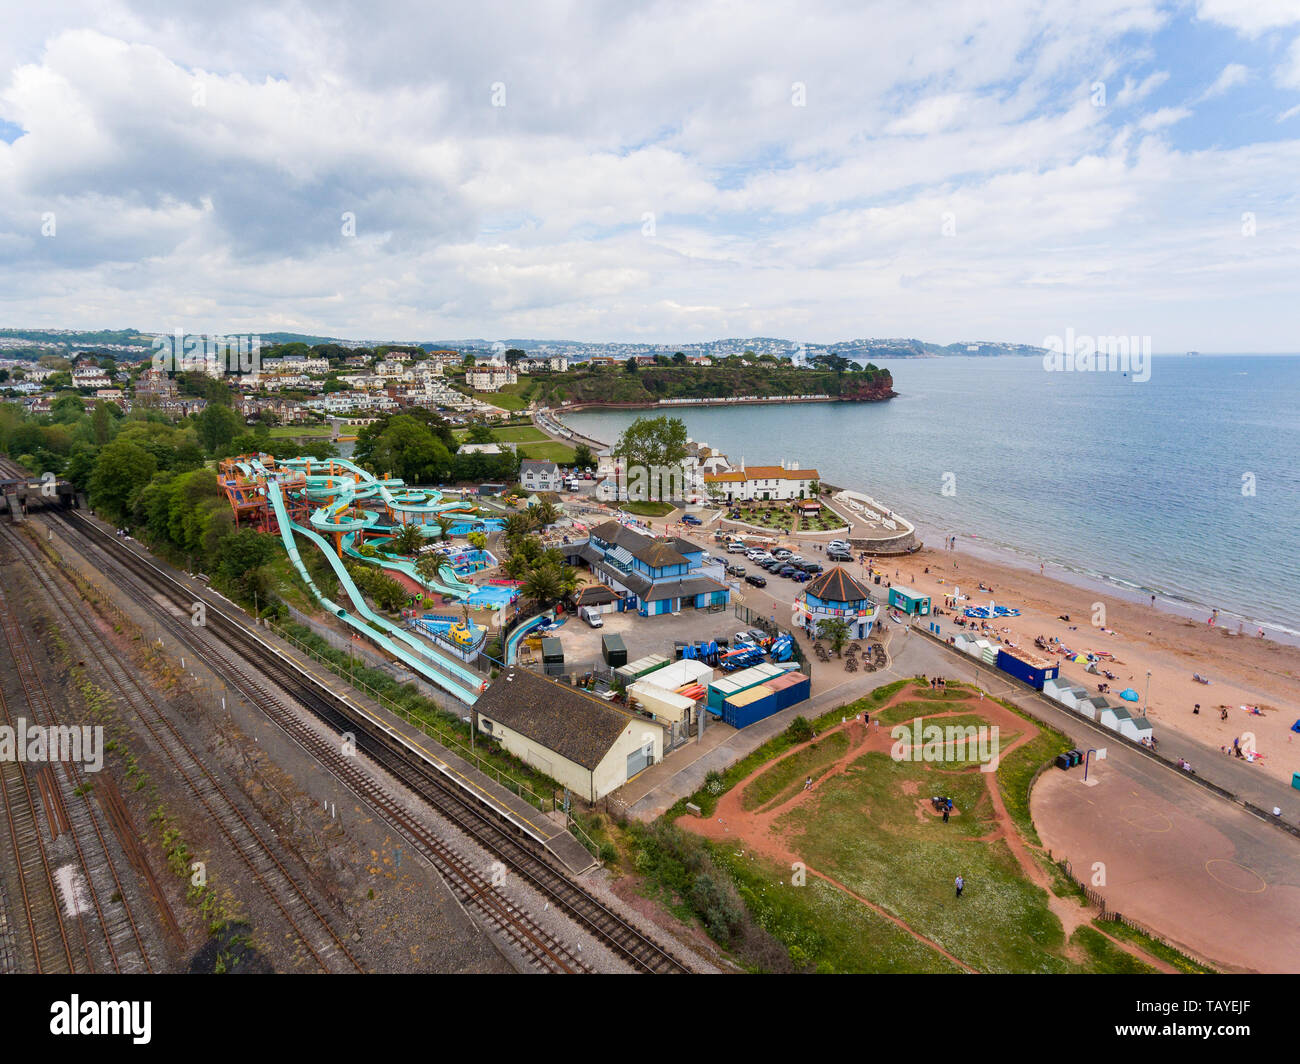 Aerial drone view looking straight down from above colorful summer time fun at water park near a beach Stock Photo